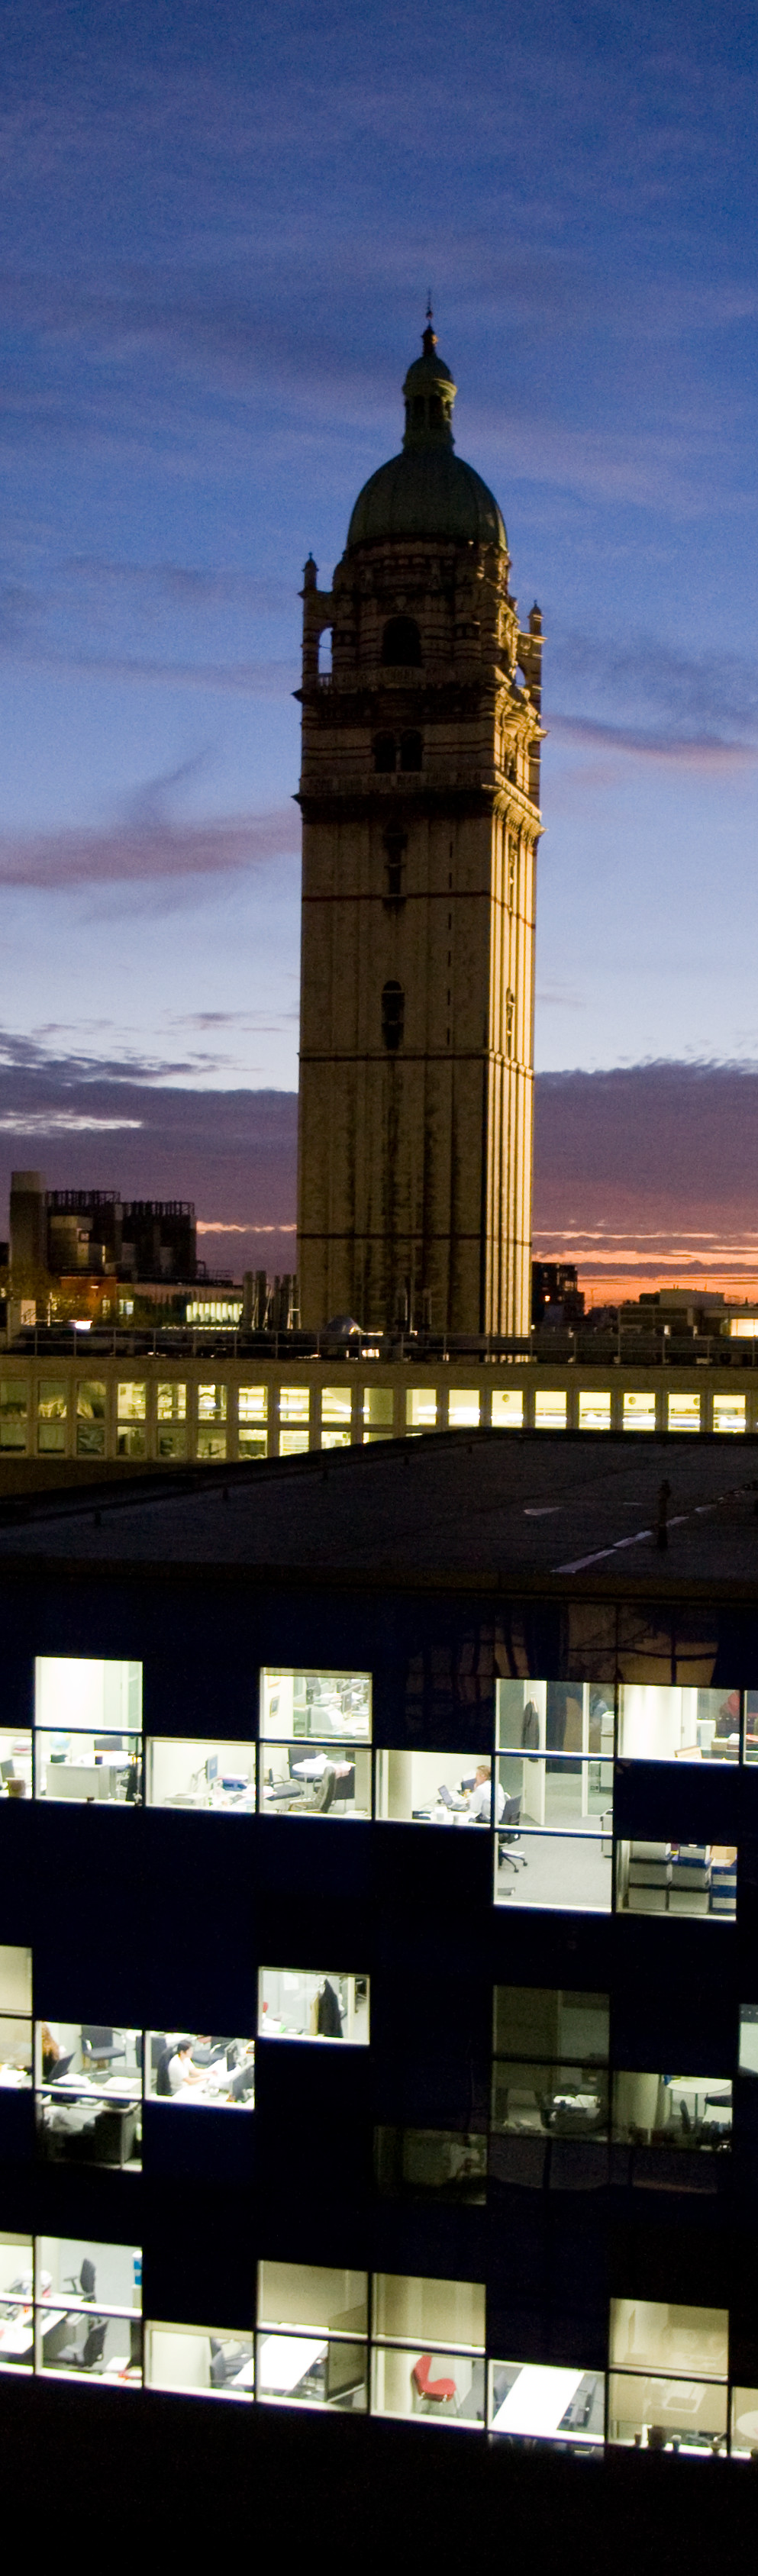 Queen's Tower, Imperial College